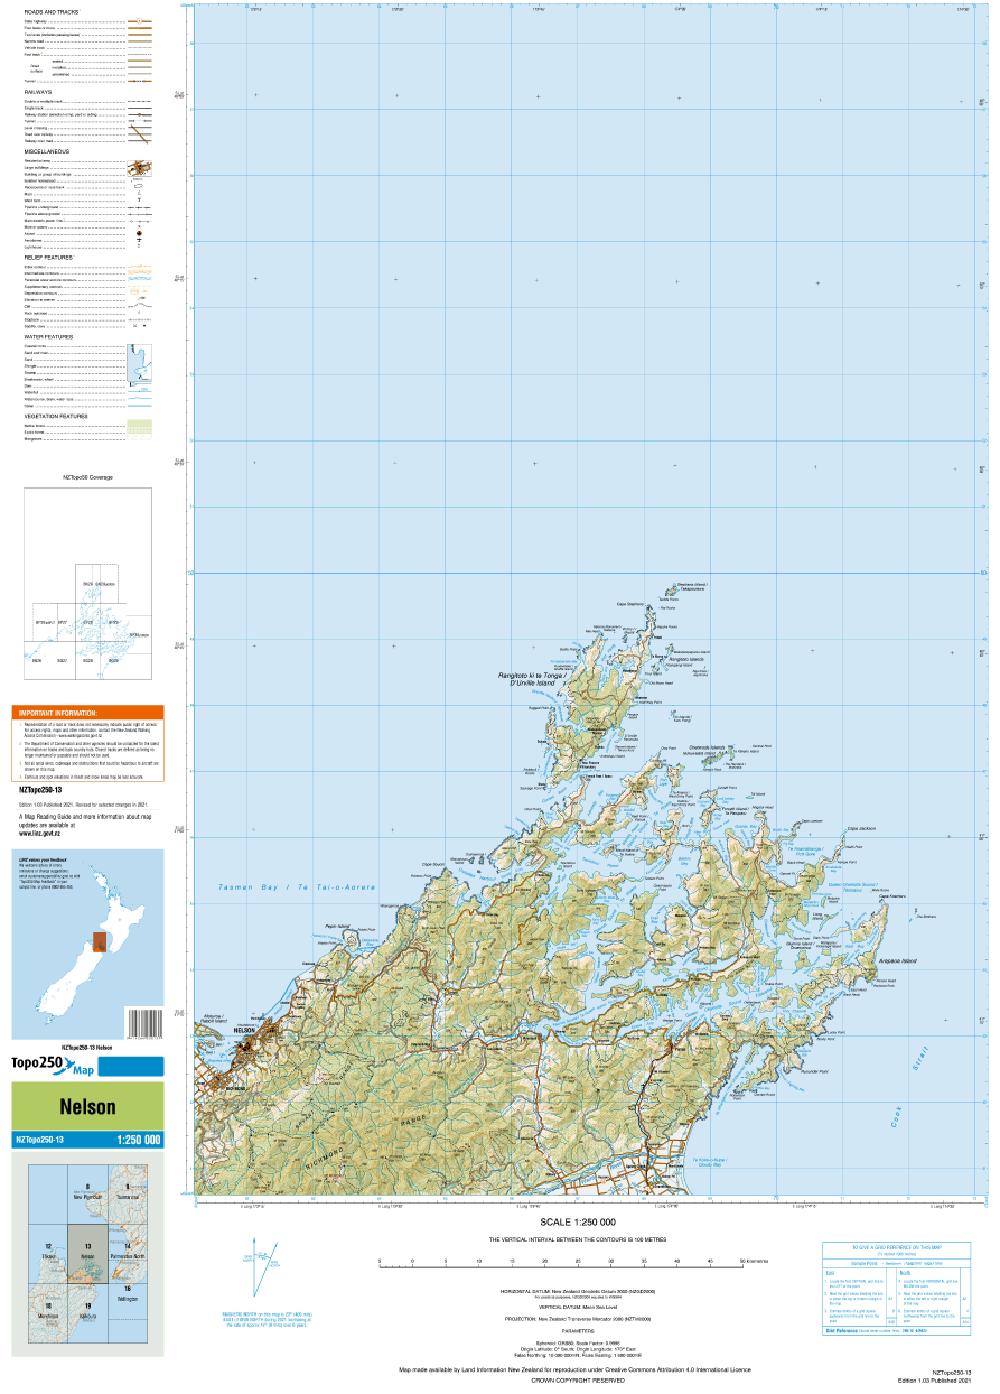 Topo map of Nelson